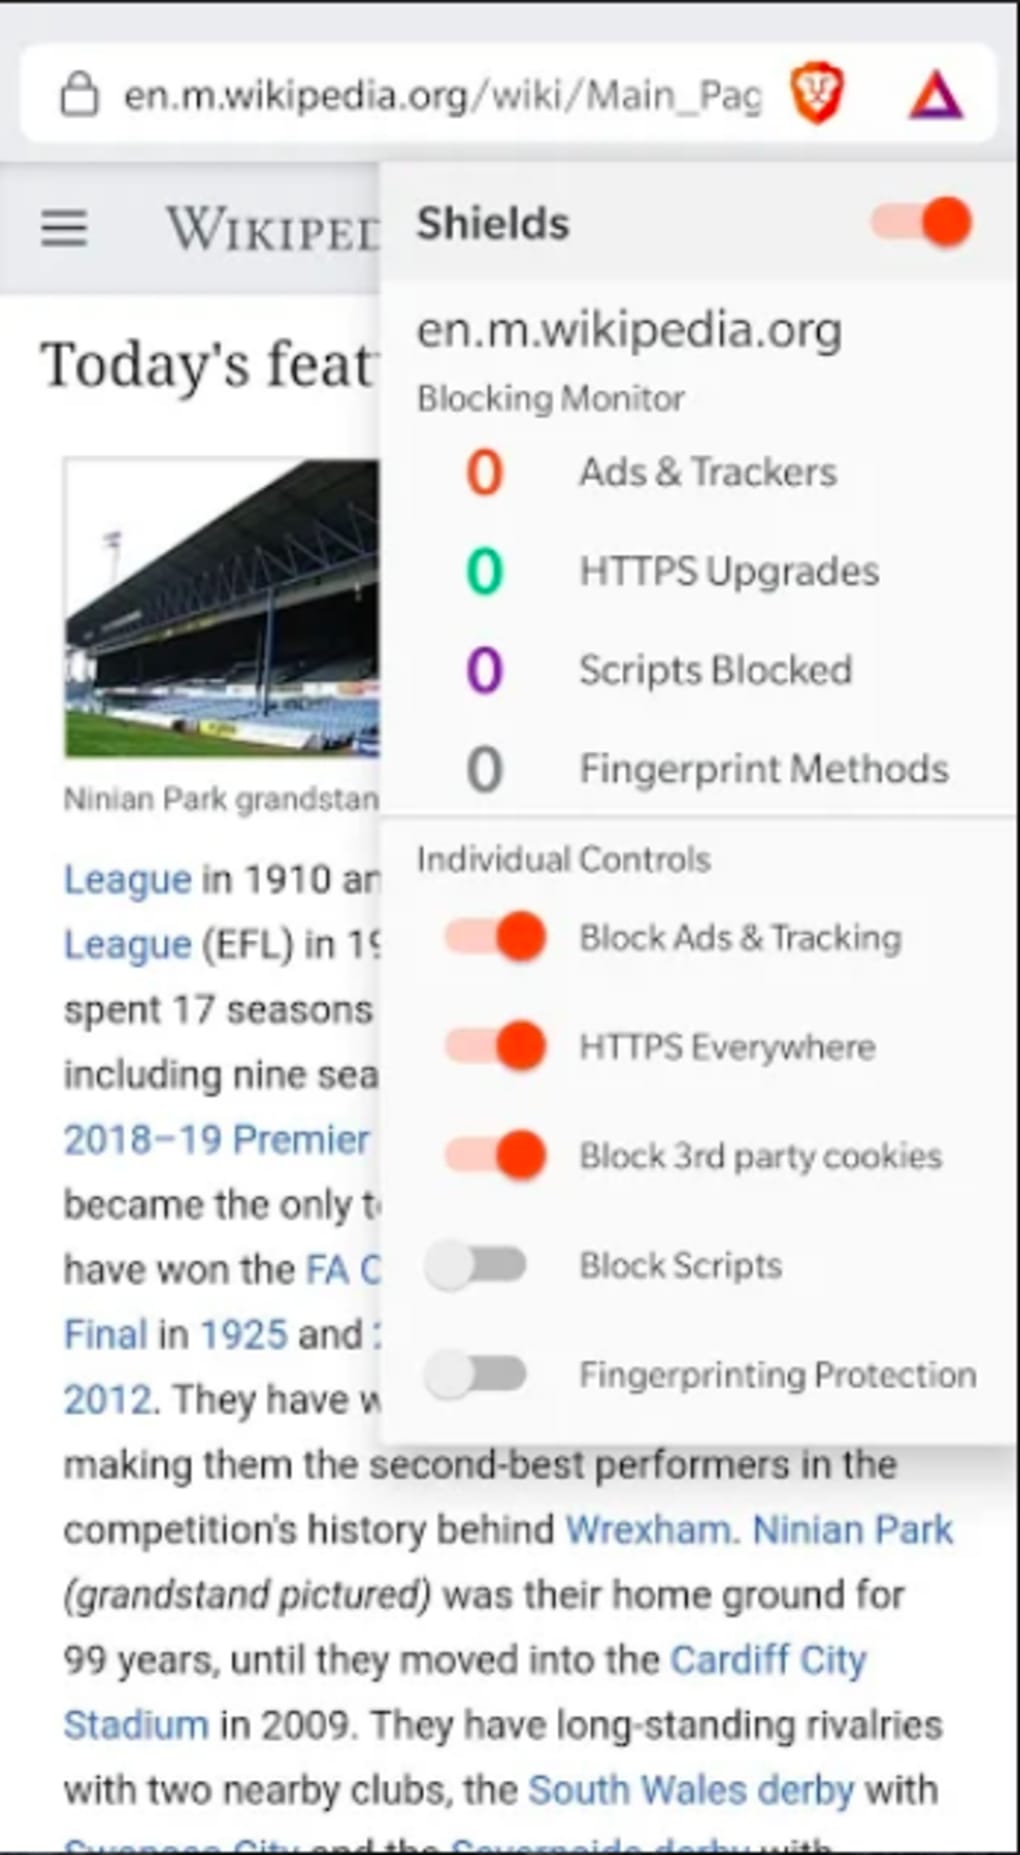 brave 1.52.126 for ios download free